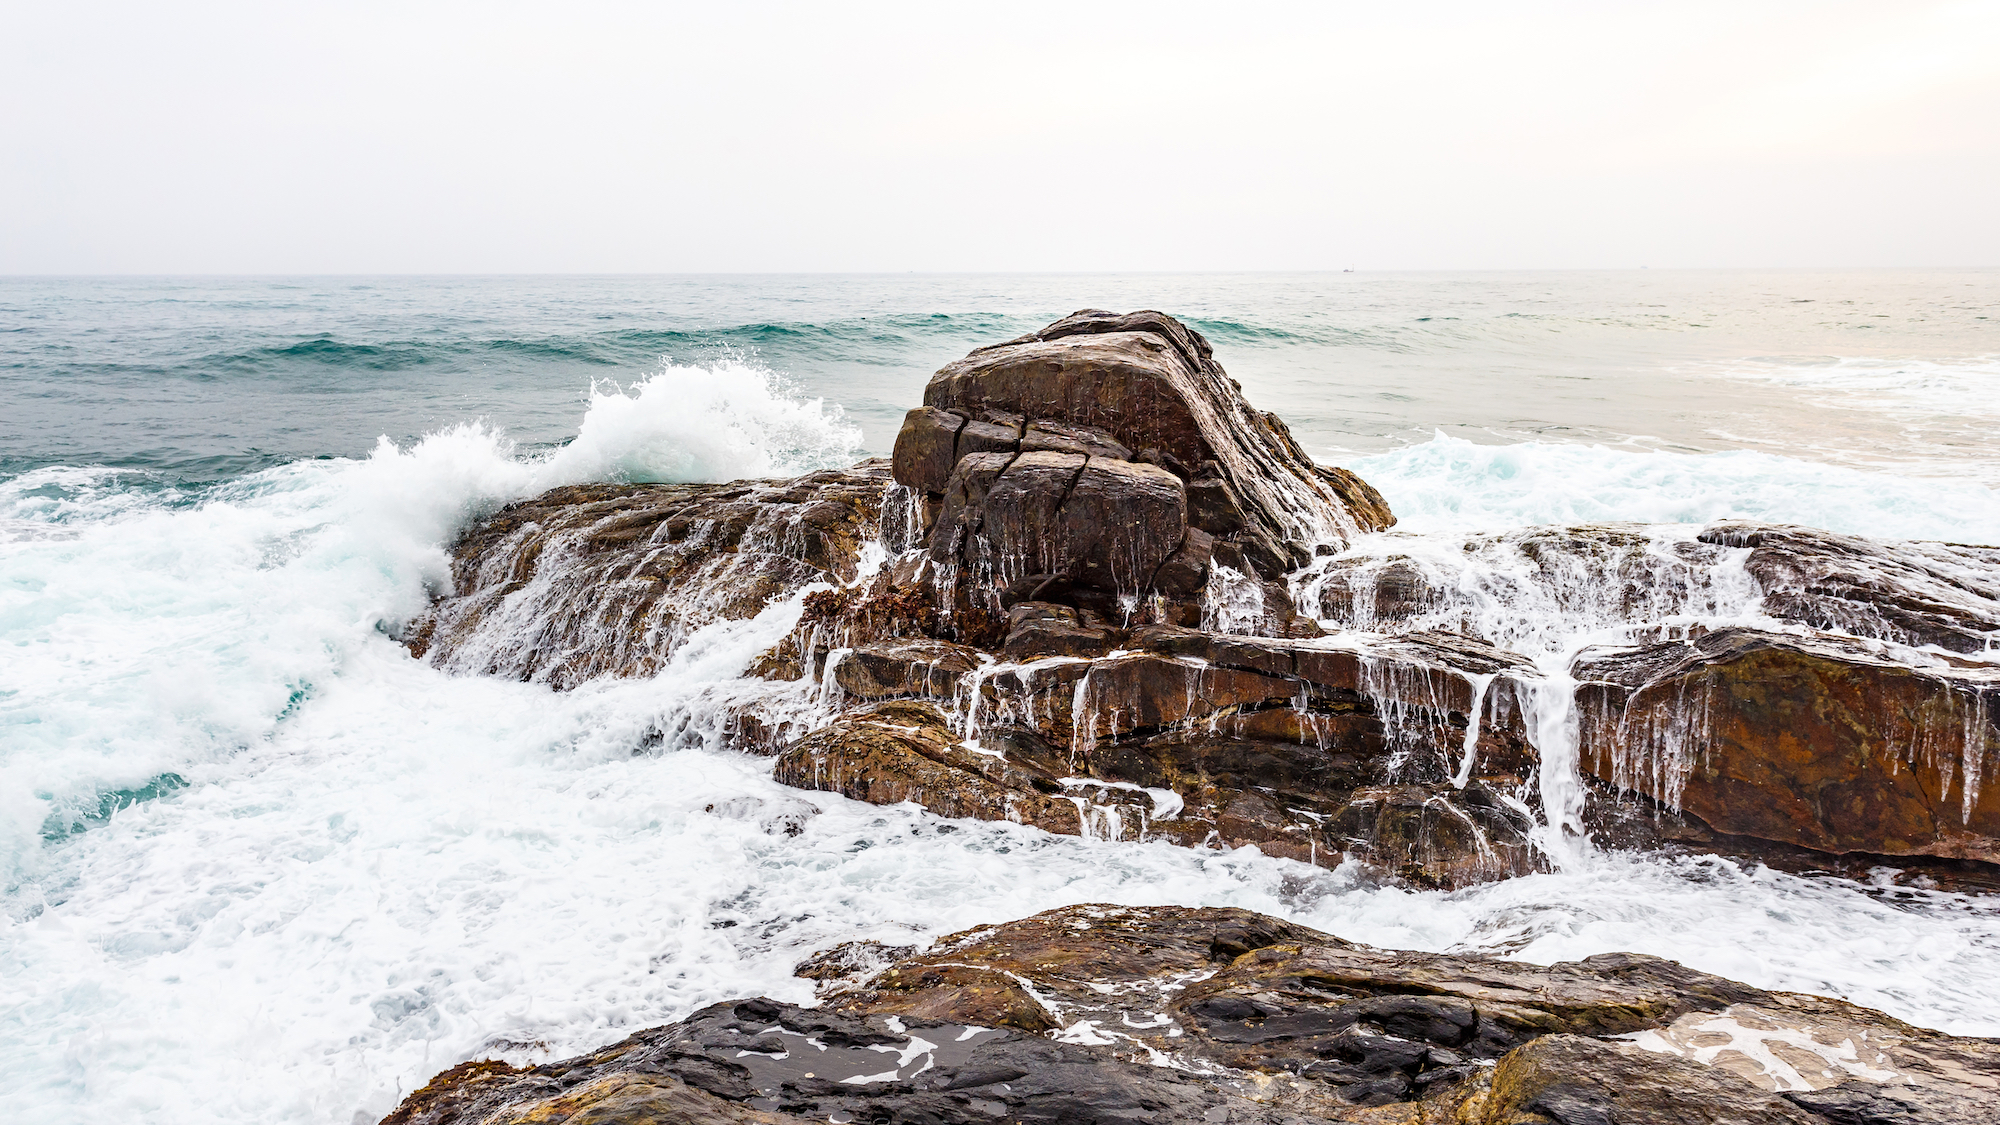 Ocean waves crashing on rocky shoreline on cloudy day.